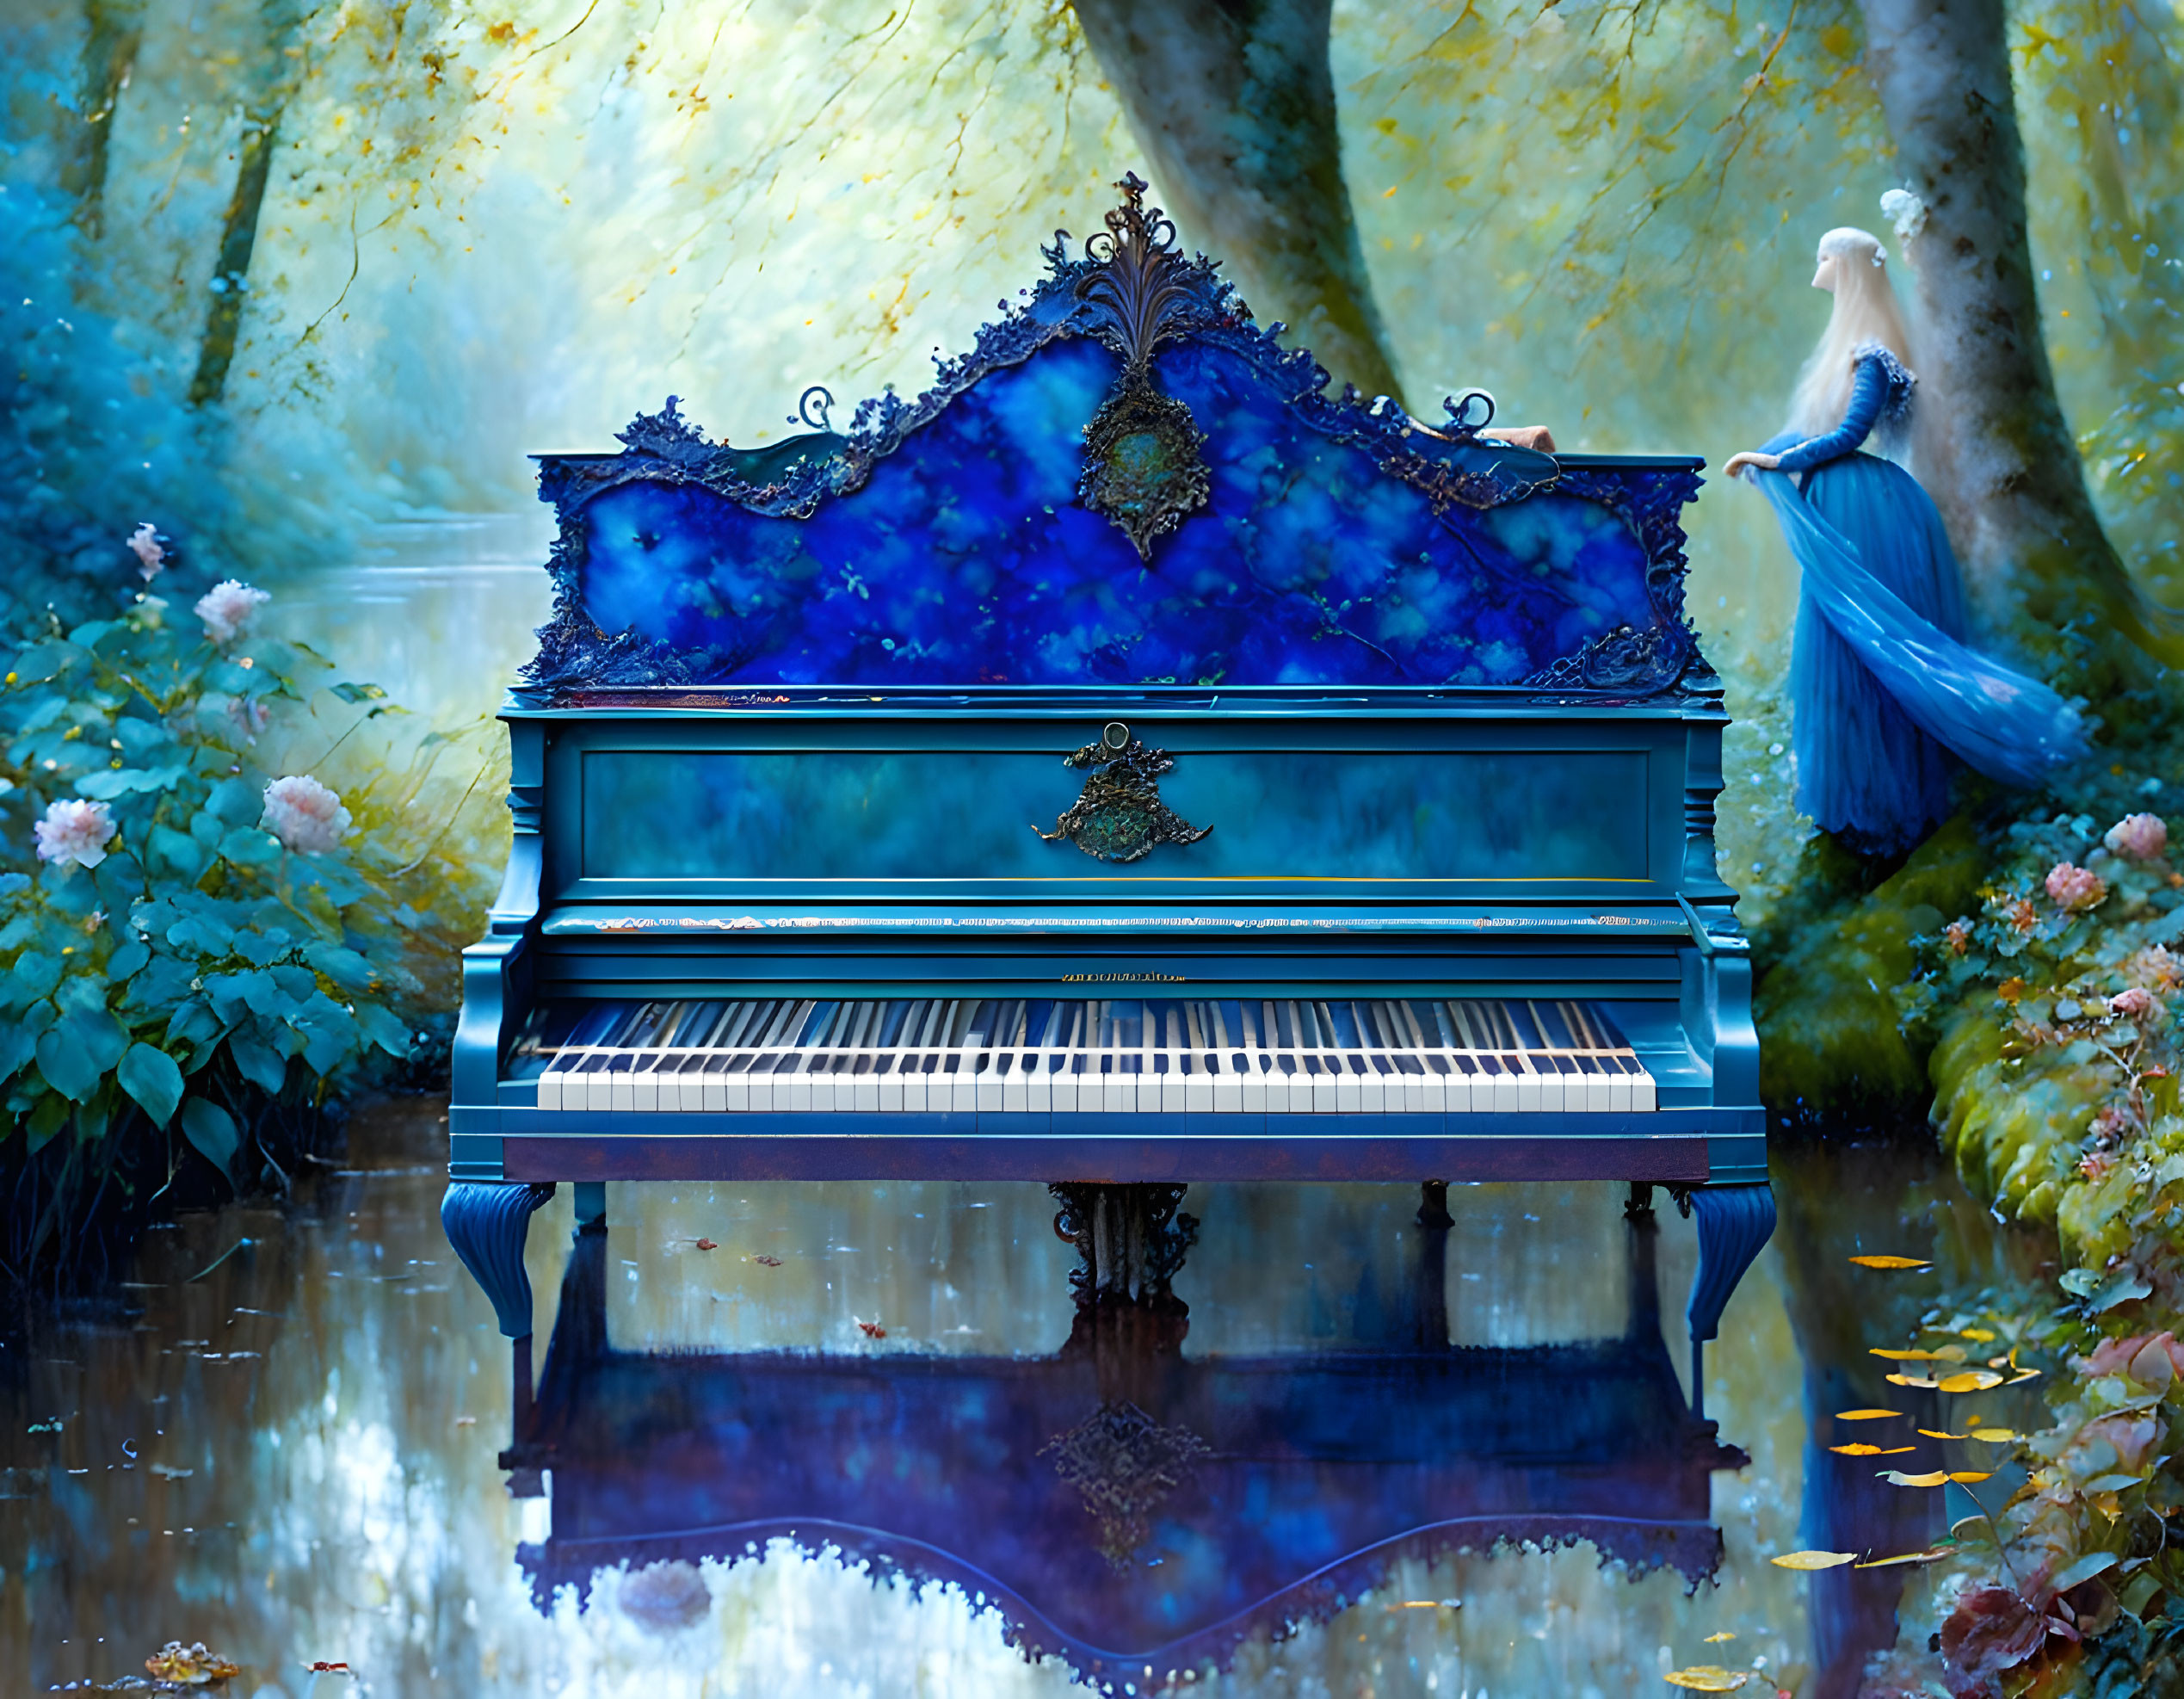 Ornate blue piano in misty forest with woman in flowing dress